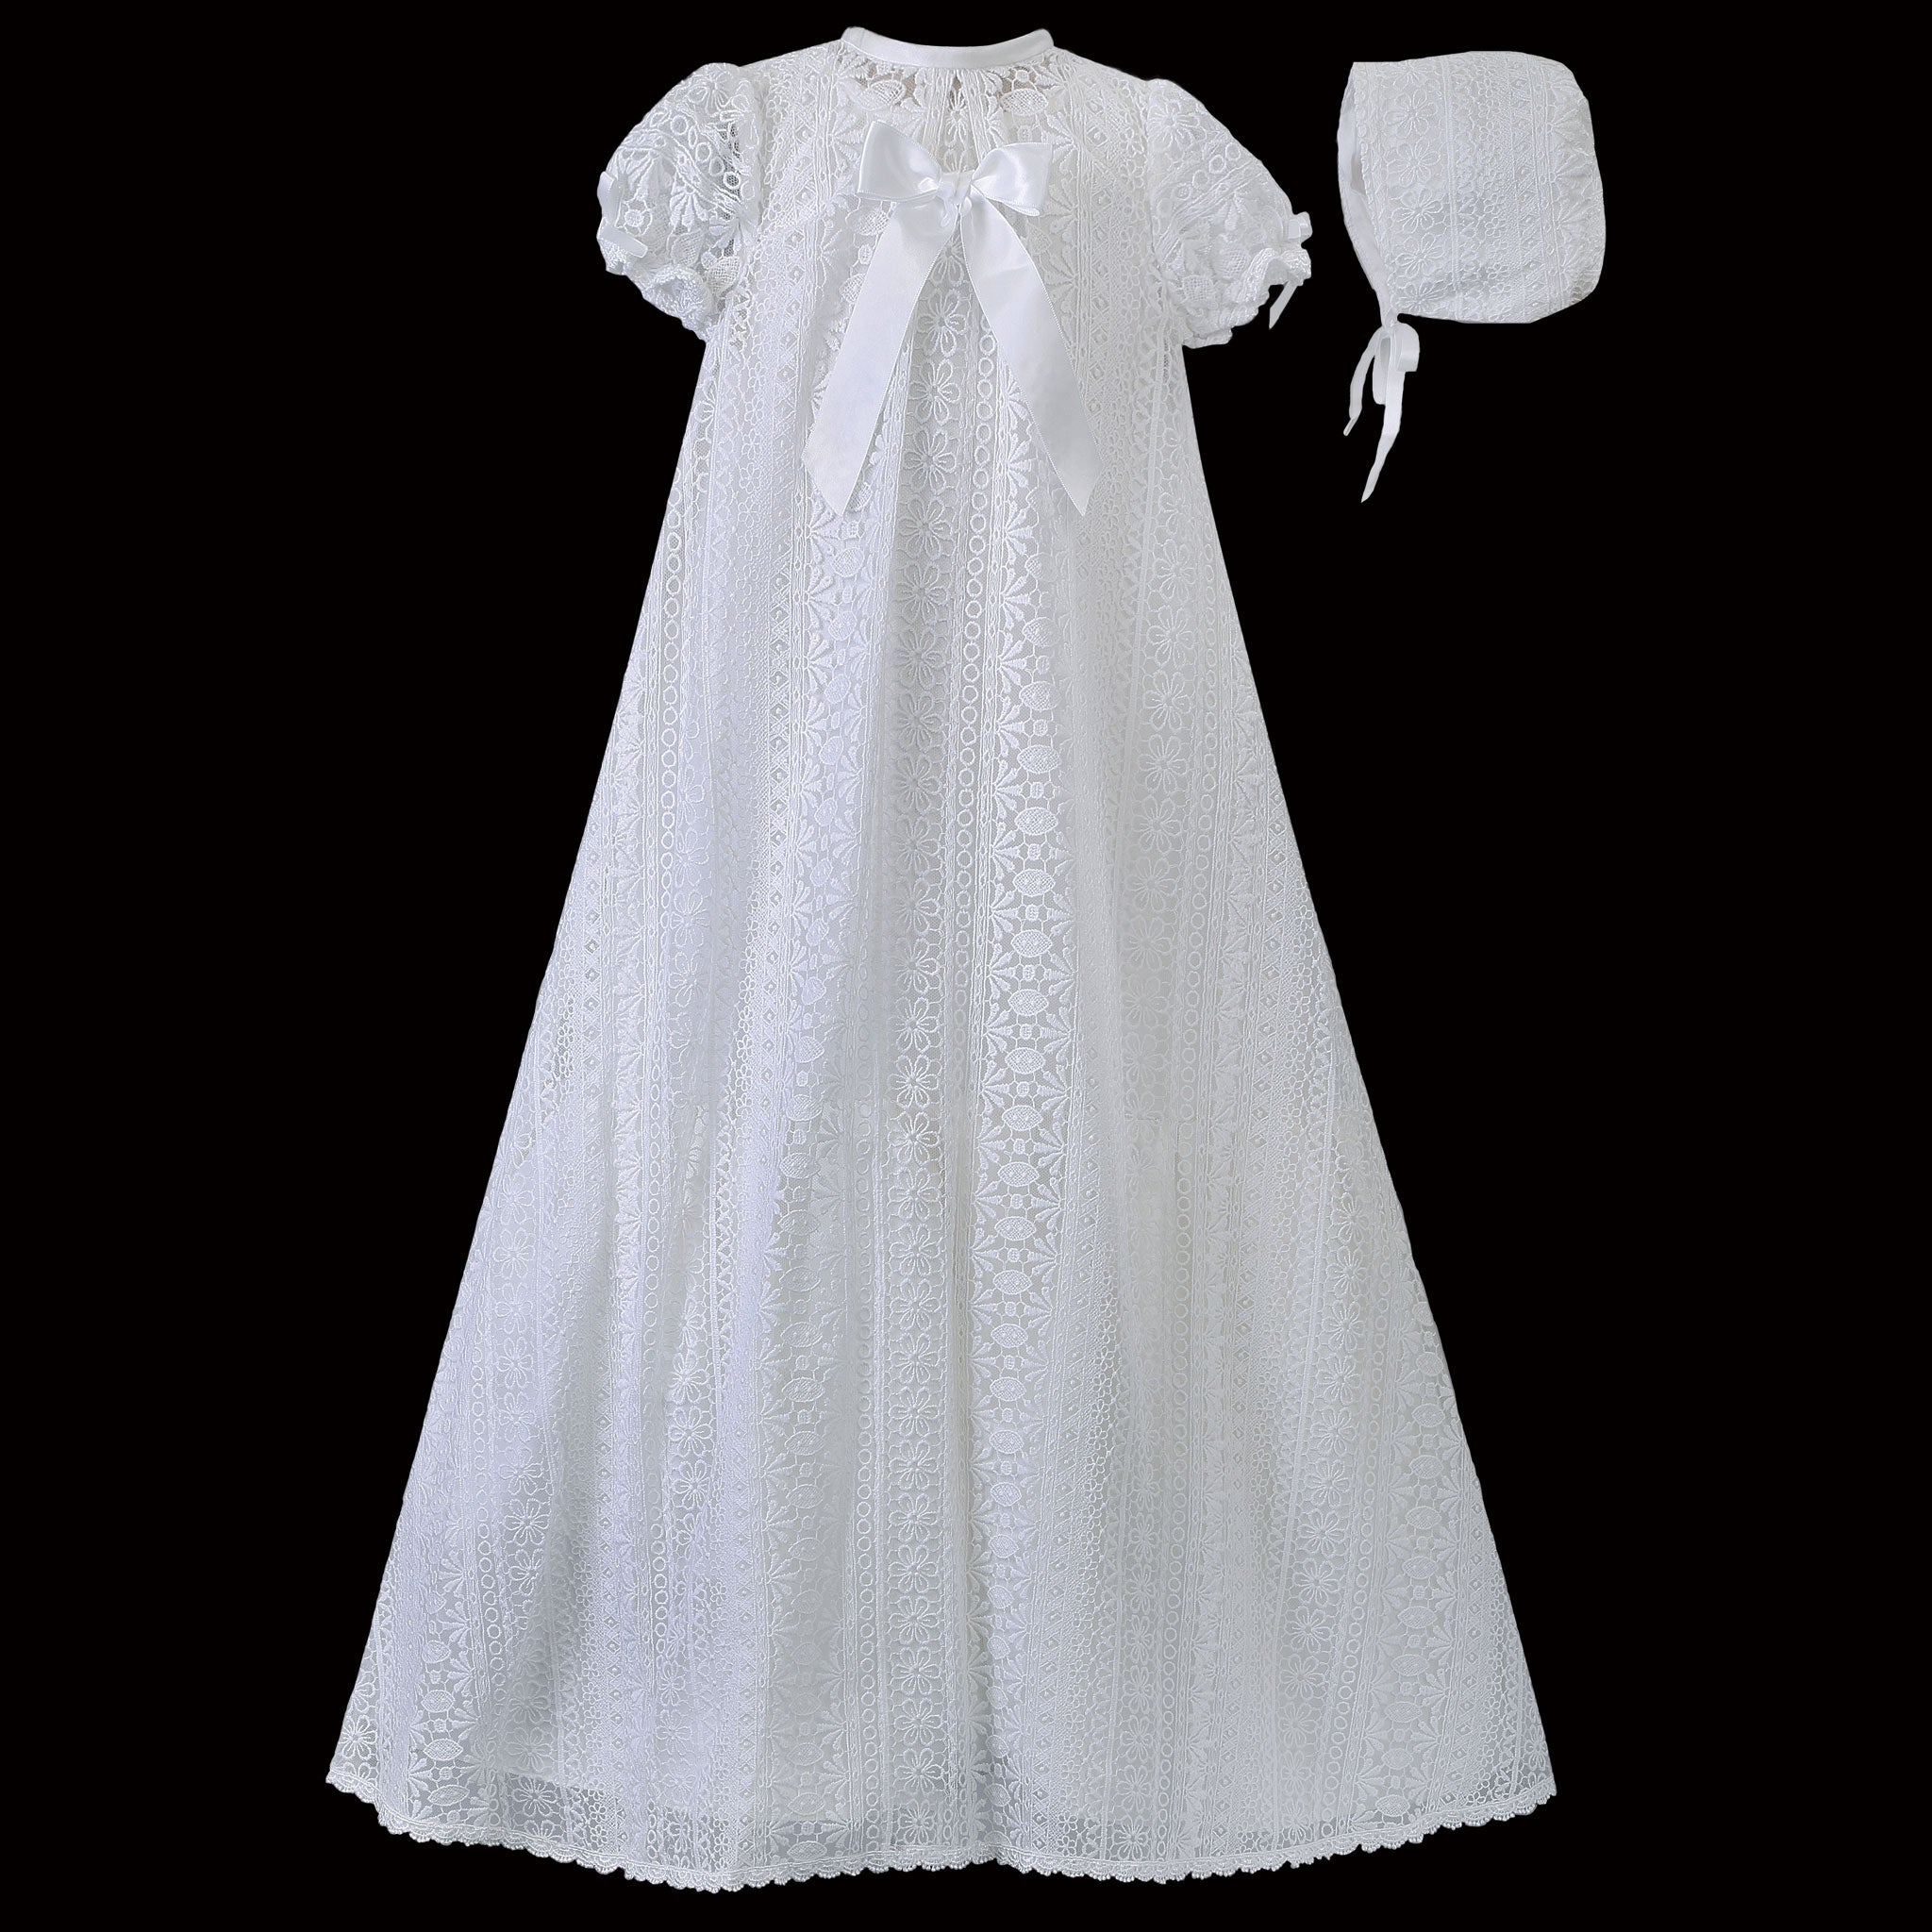 sarah louise lace christening robe gown